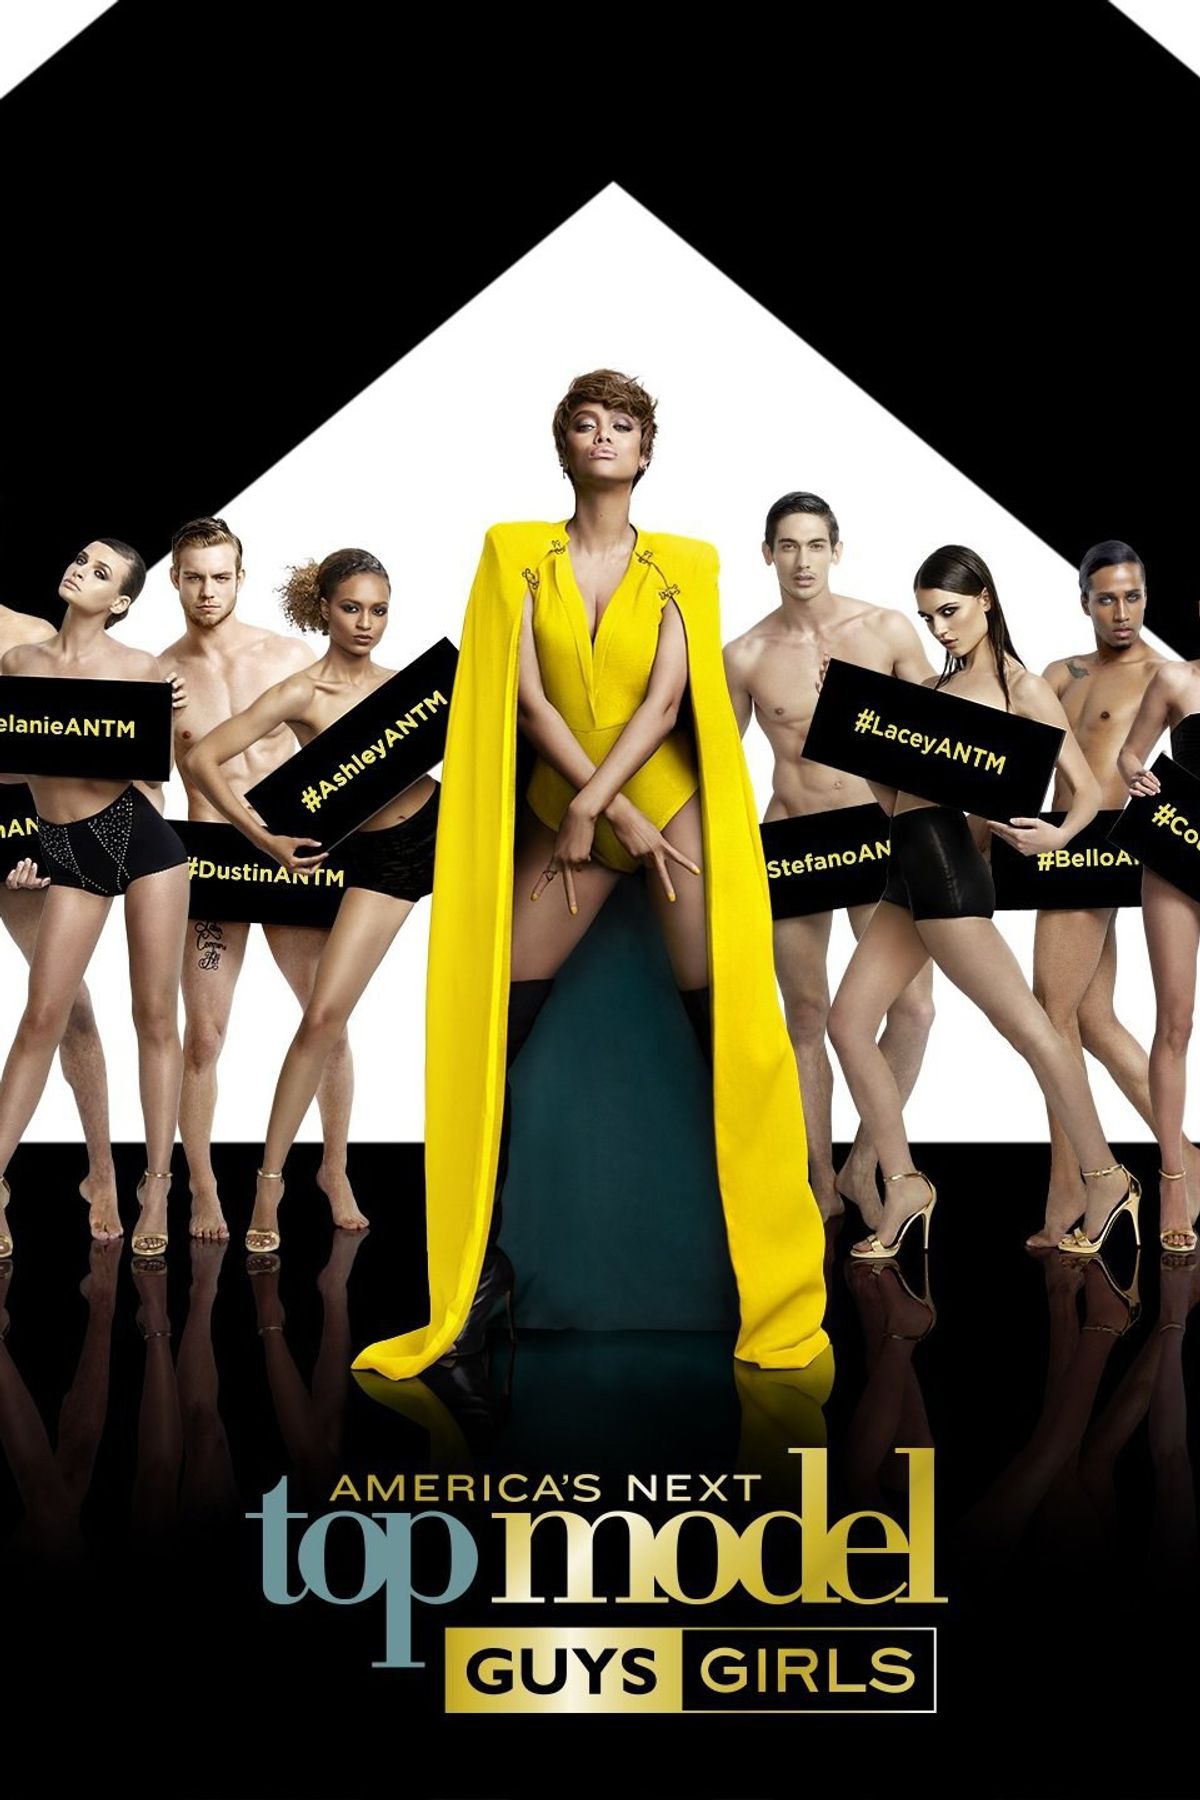 5 Things All America's Next Top Model Fans Know